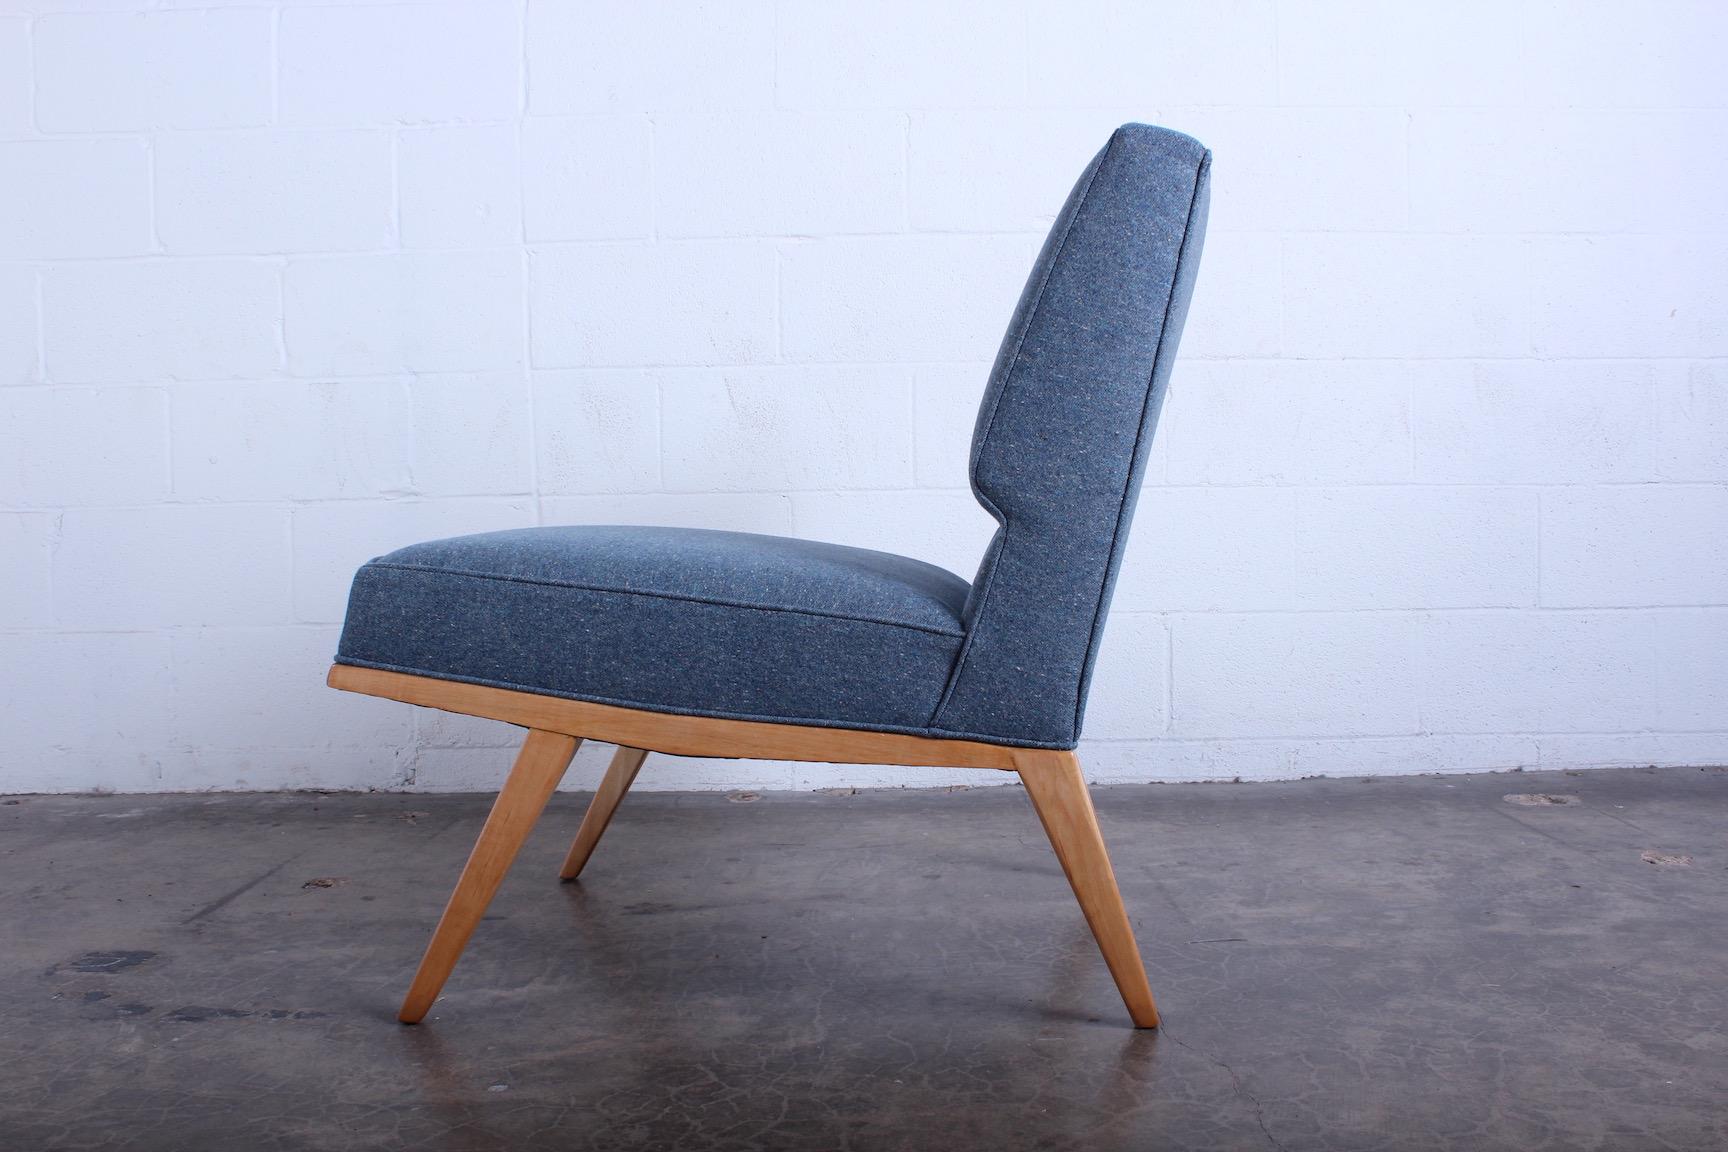 A rare slipper chair with maple frame, model 1202 designed by Paul McCobb for Custom Craft, 1950.